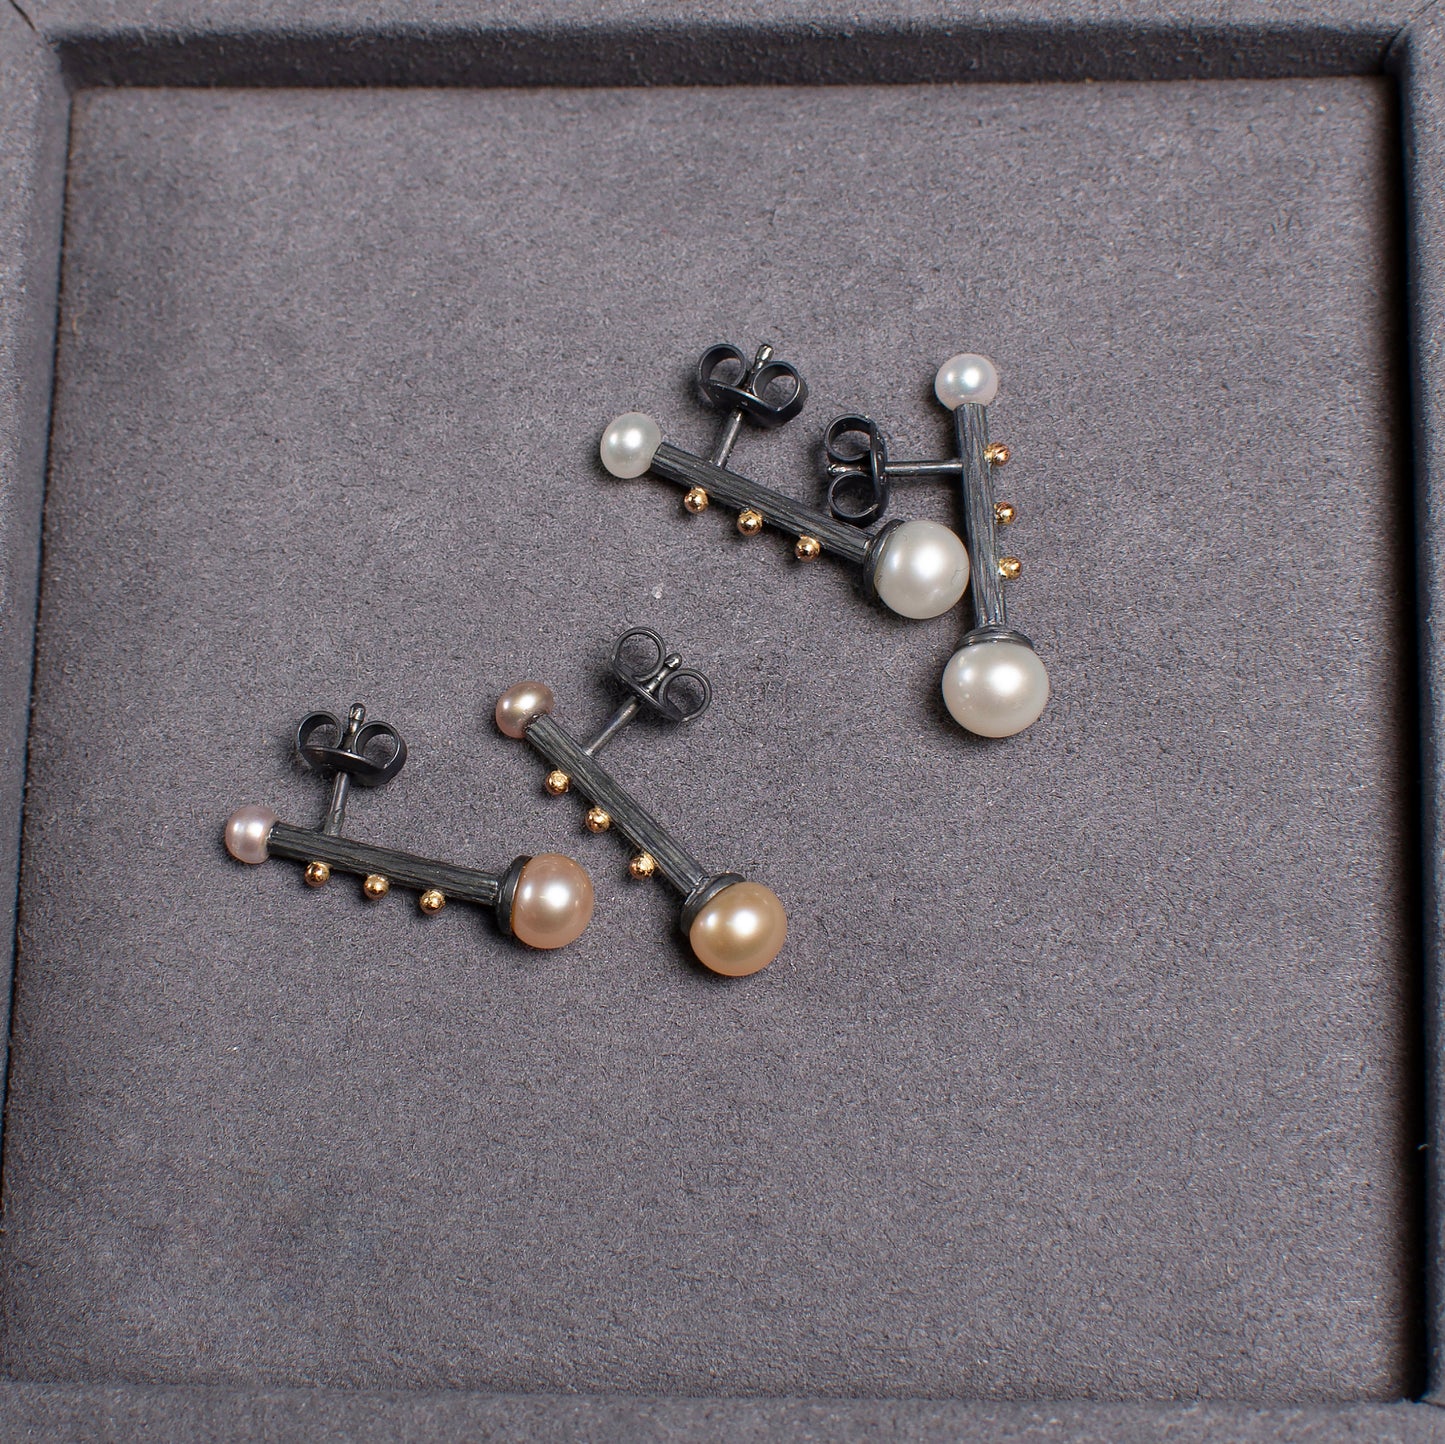 Silver Earrings And Pendant With Gold Beads And Pearls